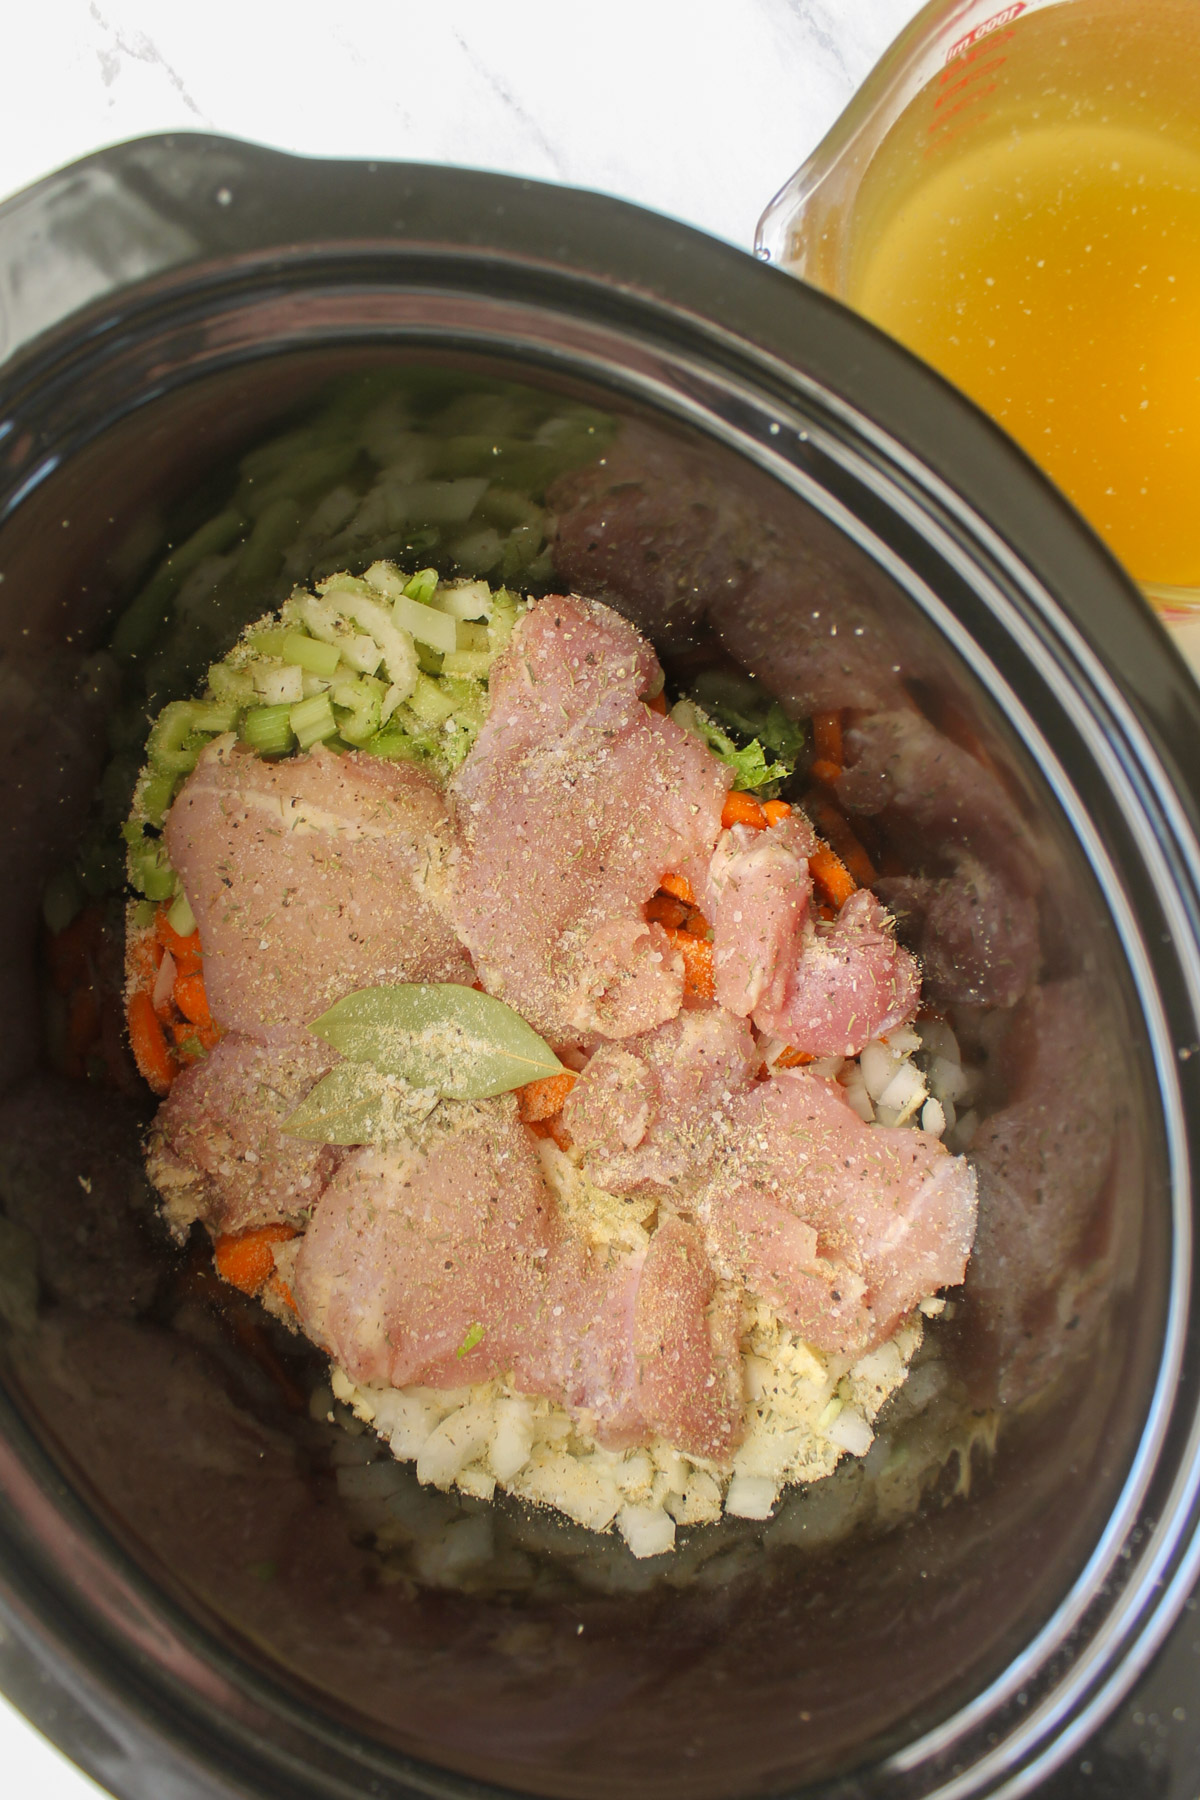 A crockpot with vegetables, raw chicken and seasoning.